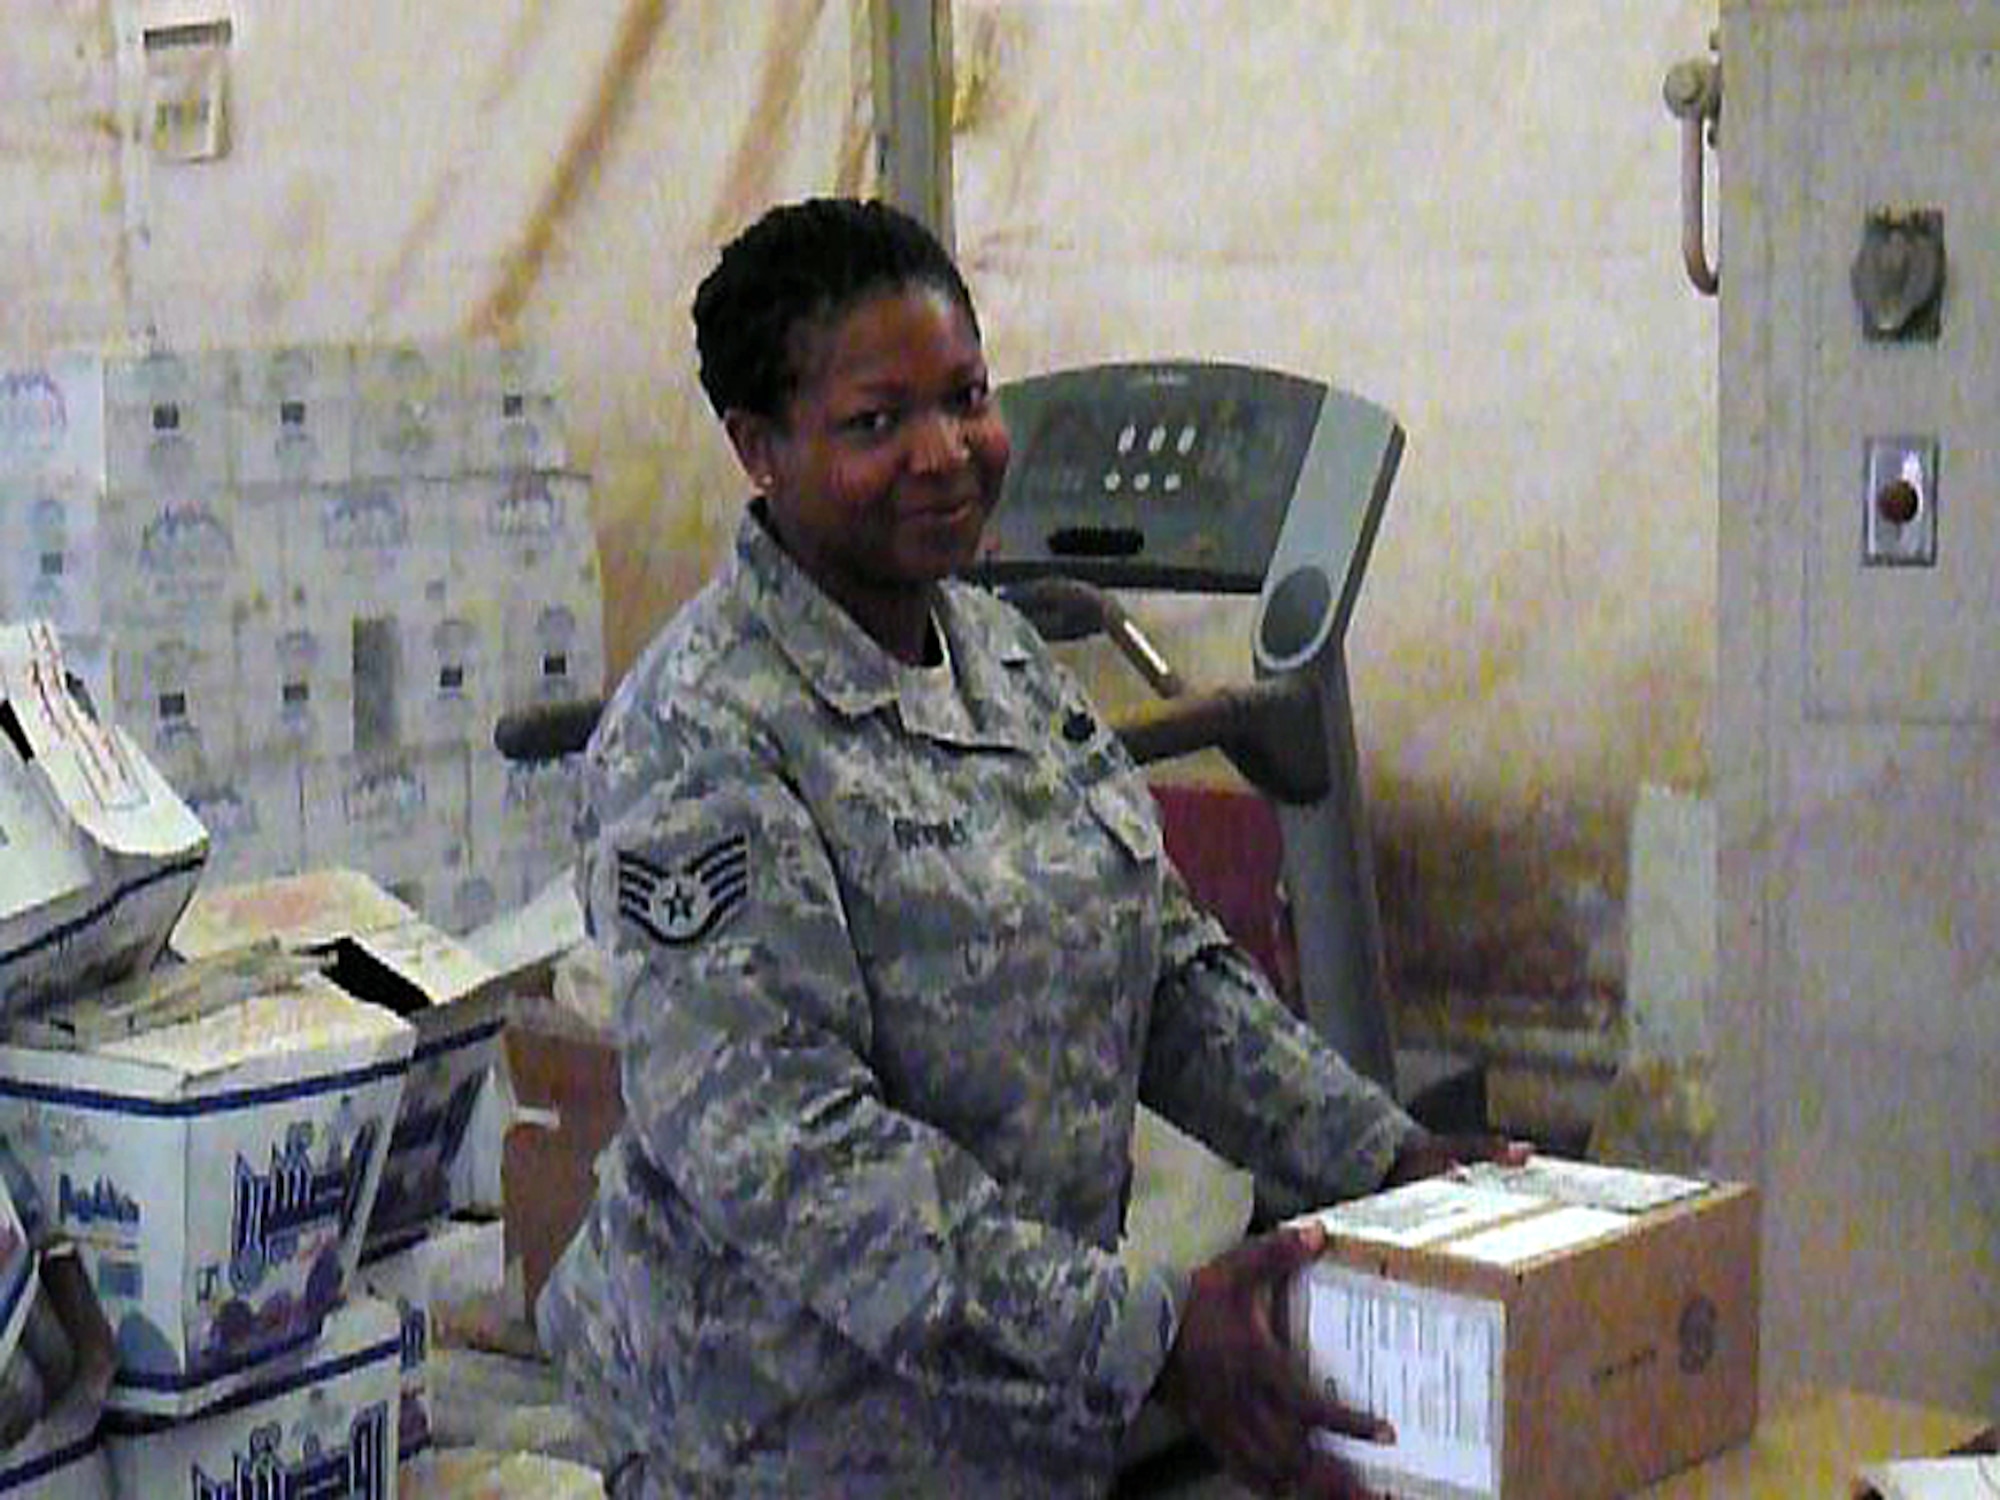 SOUTHWEST ASIA -- Staff Sgt. Paula Spruill, 387th Expeditionary Support Squadron supply NCOIC, is deployed from the 4th Logistics Readiness Squadron at Seymour Johnson Air Force Base, N.C. (U.S. Air Force courtesy photo)